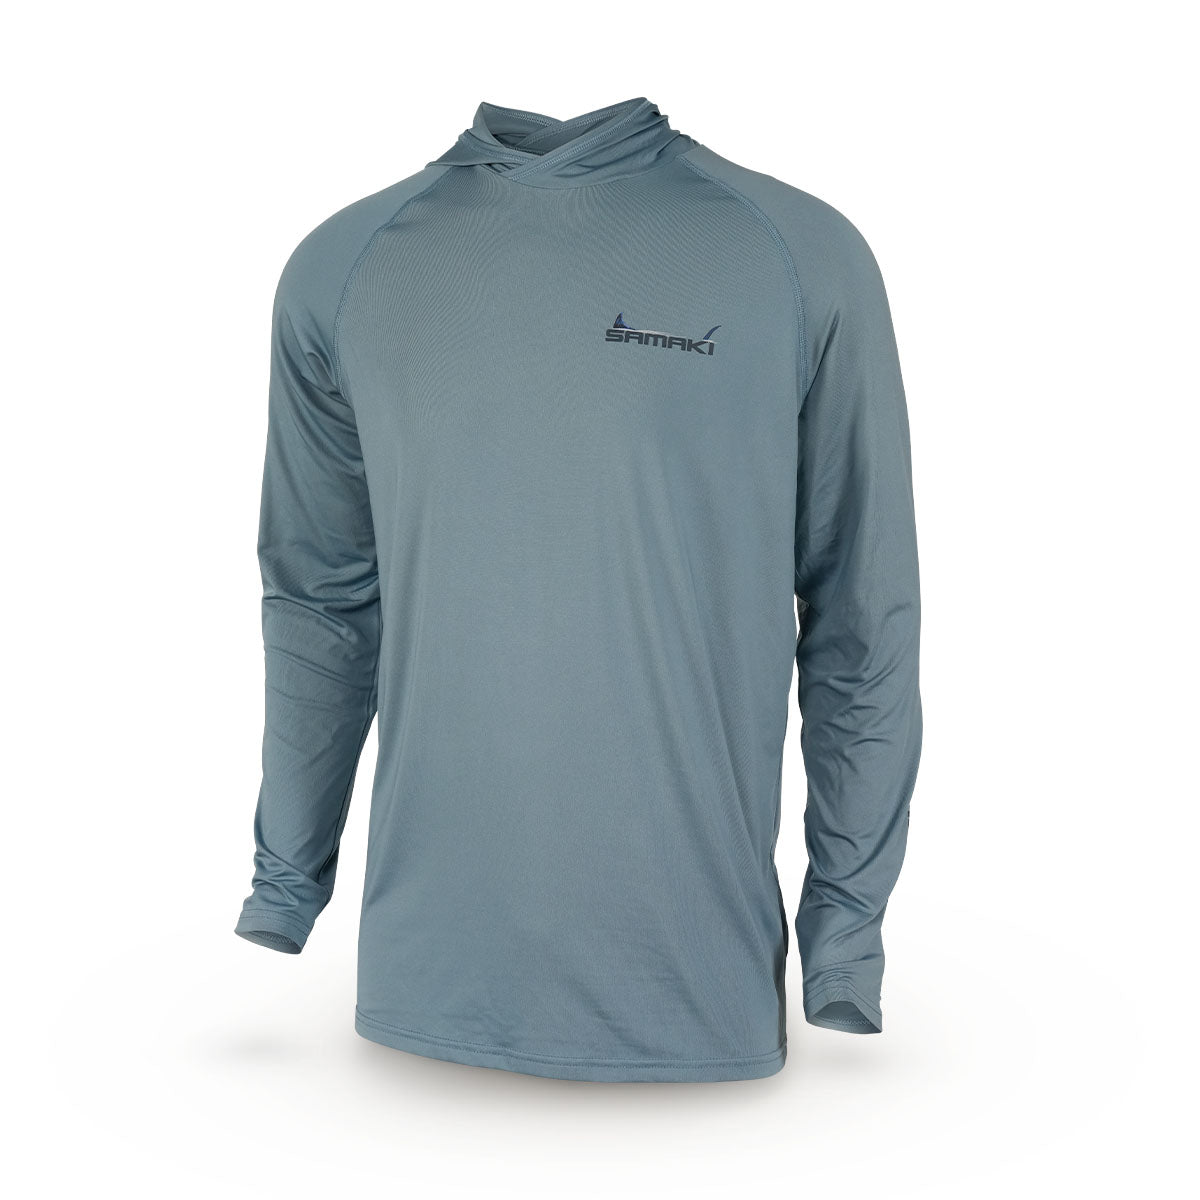 Finning Hooded Performance Shirt Youth